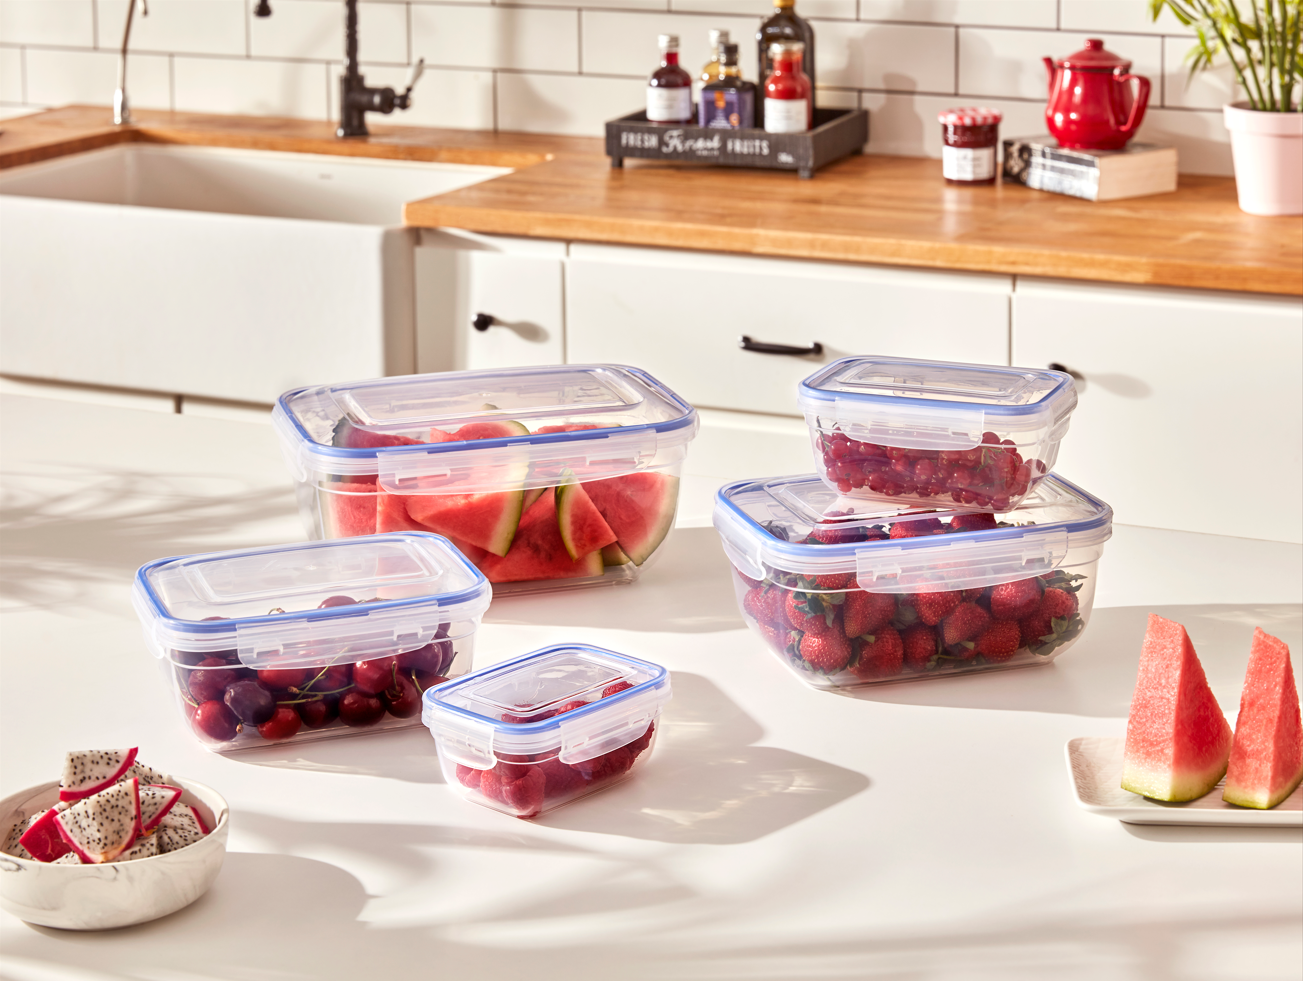 Airtight Large Reusable Leak Proof BPA Free Food Prep Containers